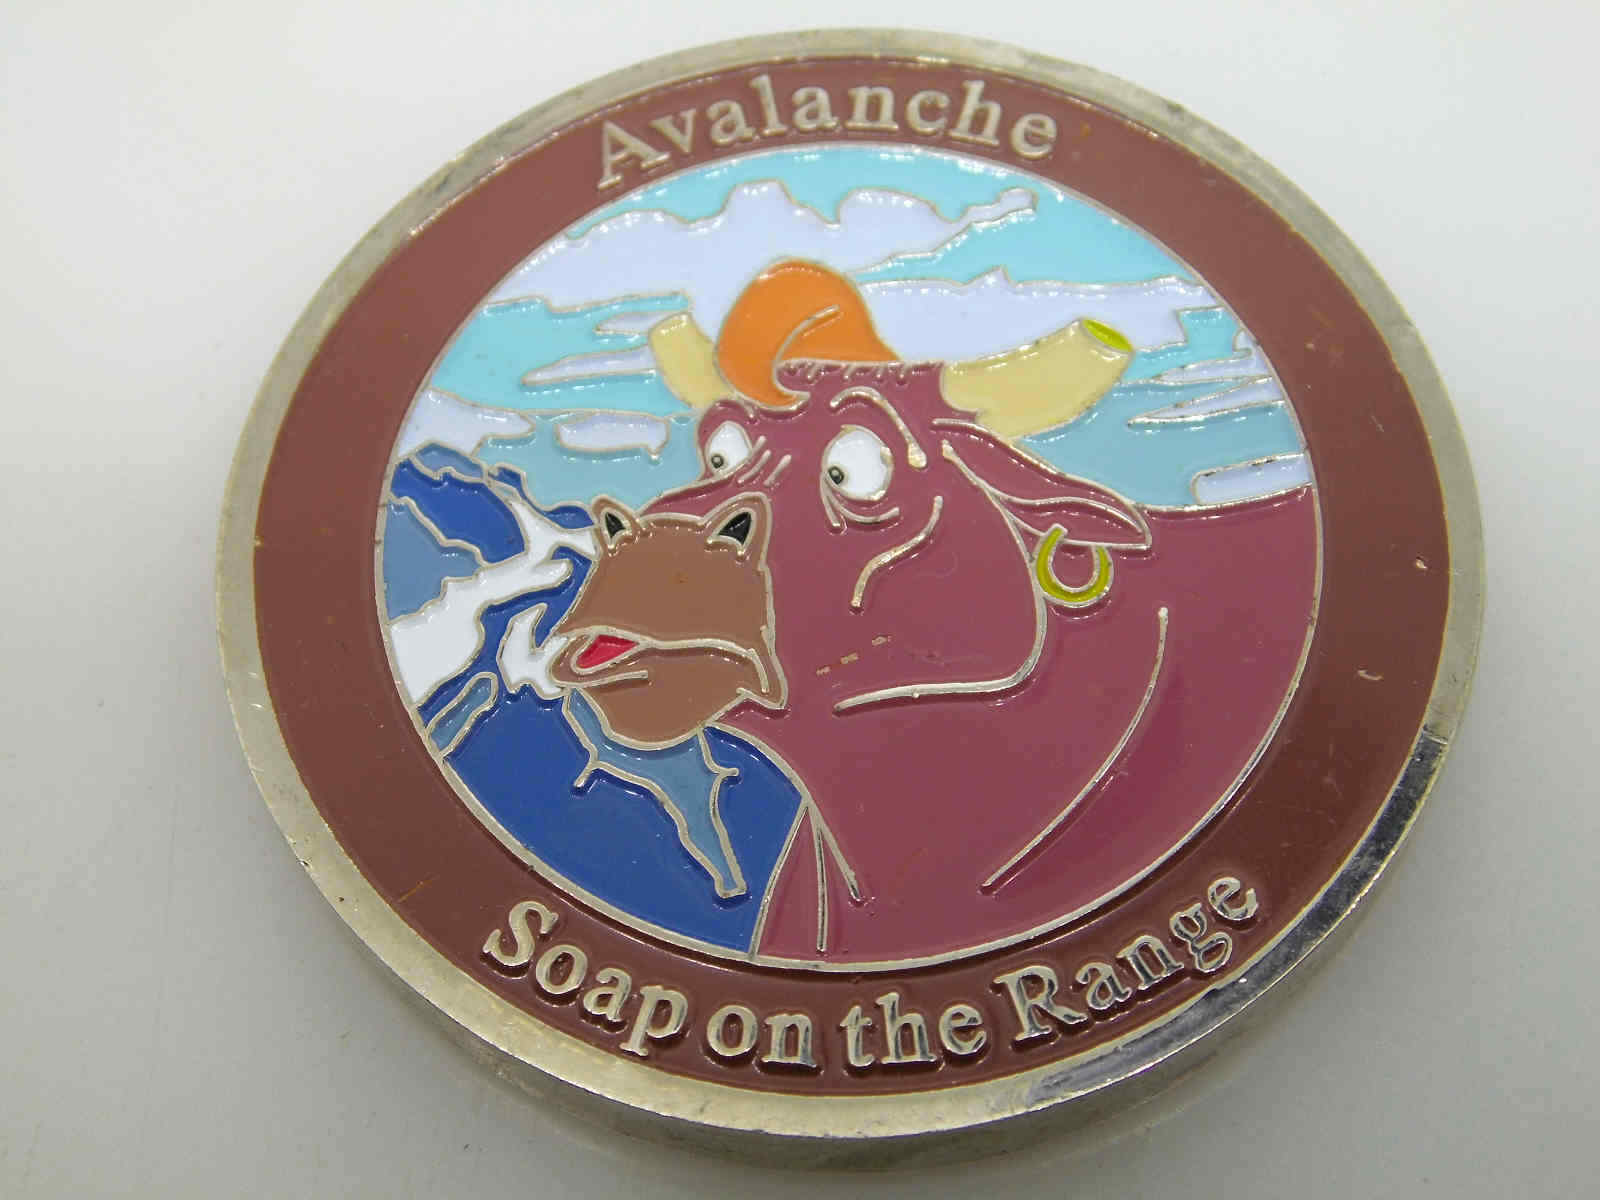 AVALANCHE SOAP ON THE RANGE CHALLENGE COIN